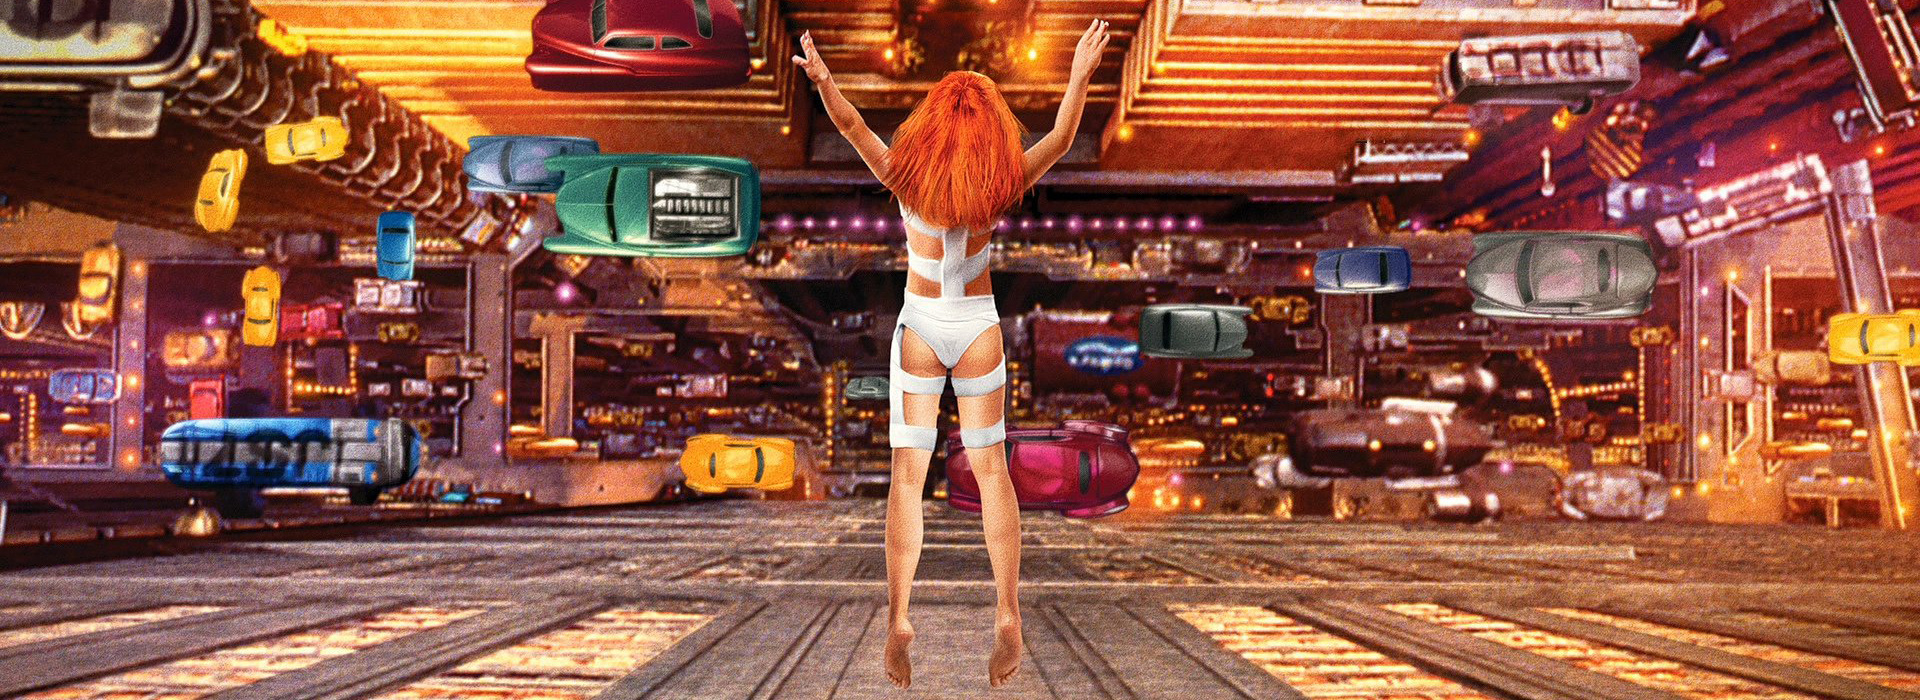 Movie poster The Fifth Element